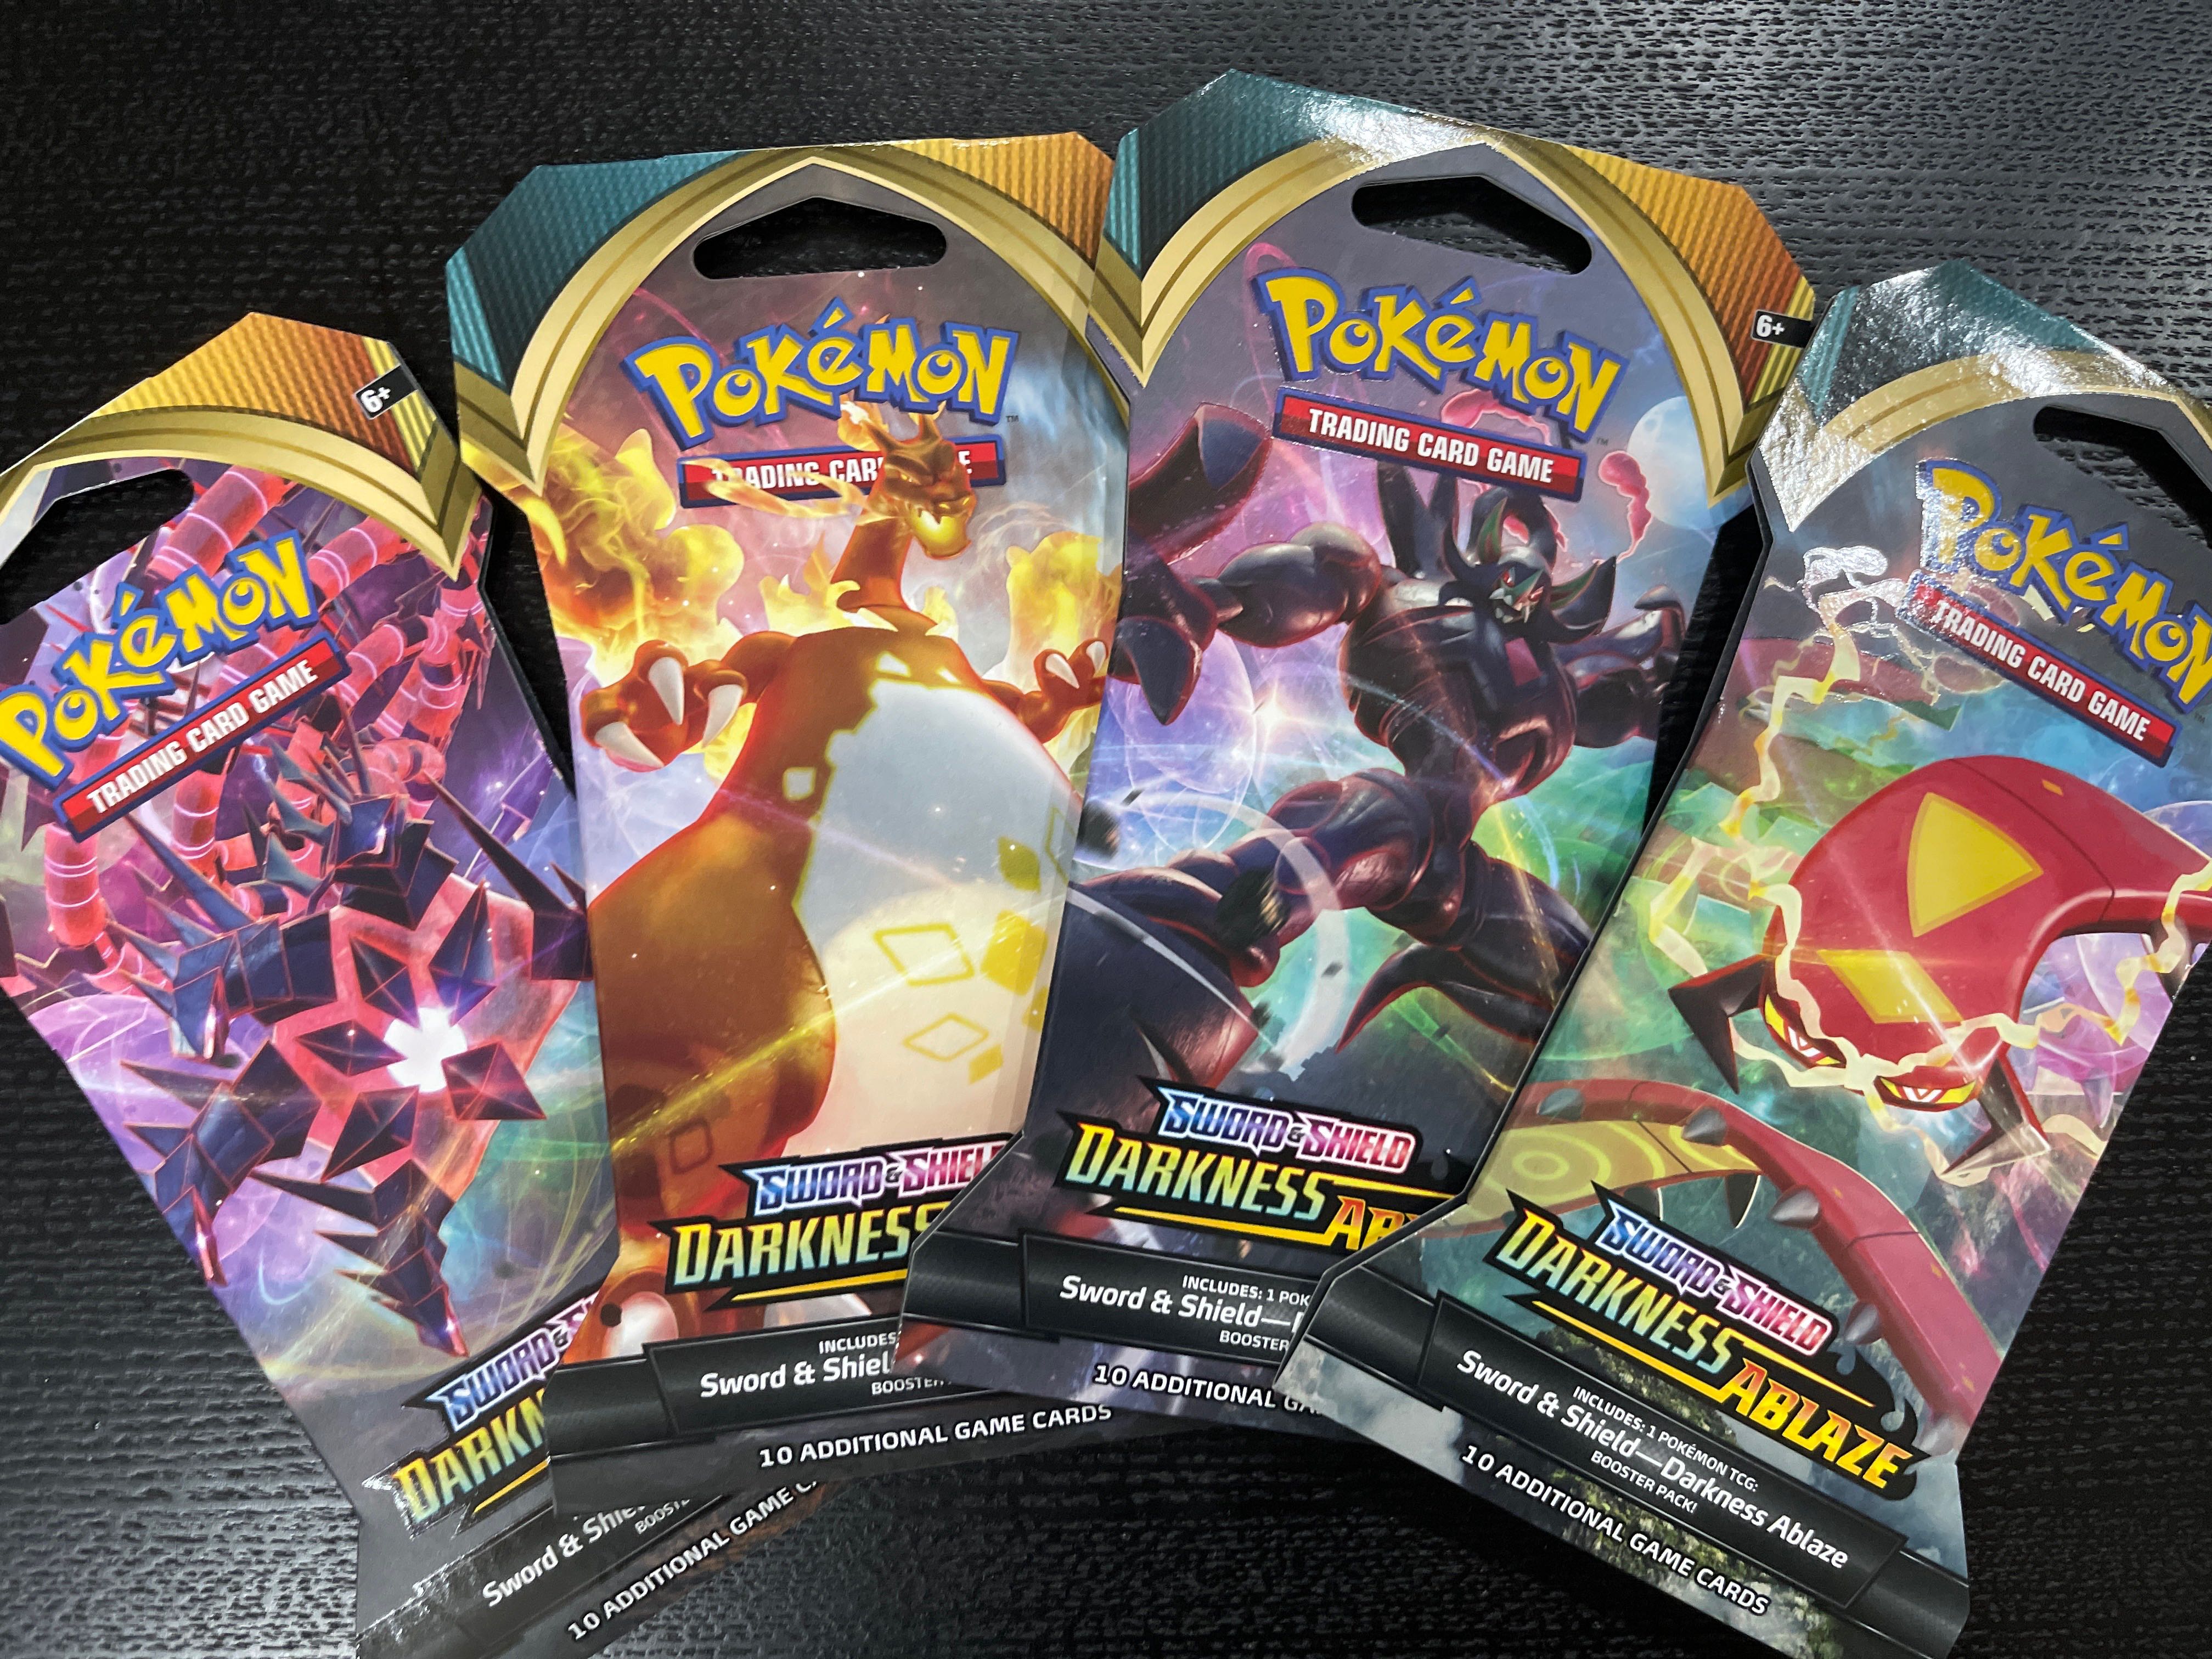 Darkness Ablaze Sword & Shield Booster Pack Pokemon English IN HAND1 pack 